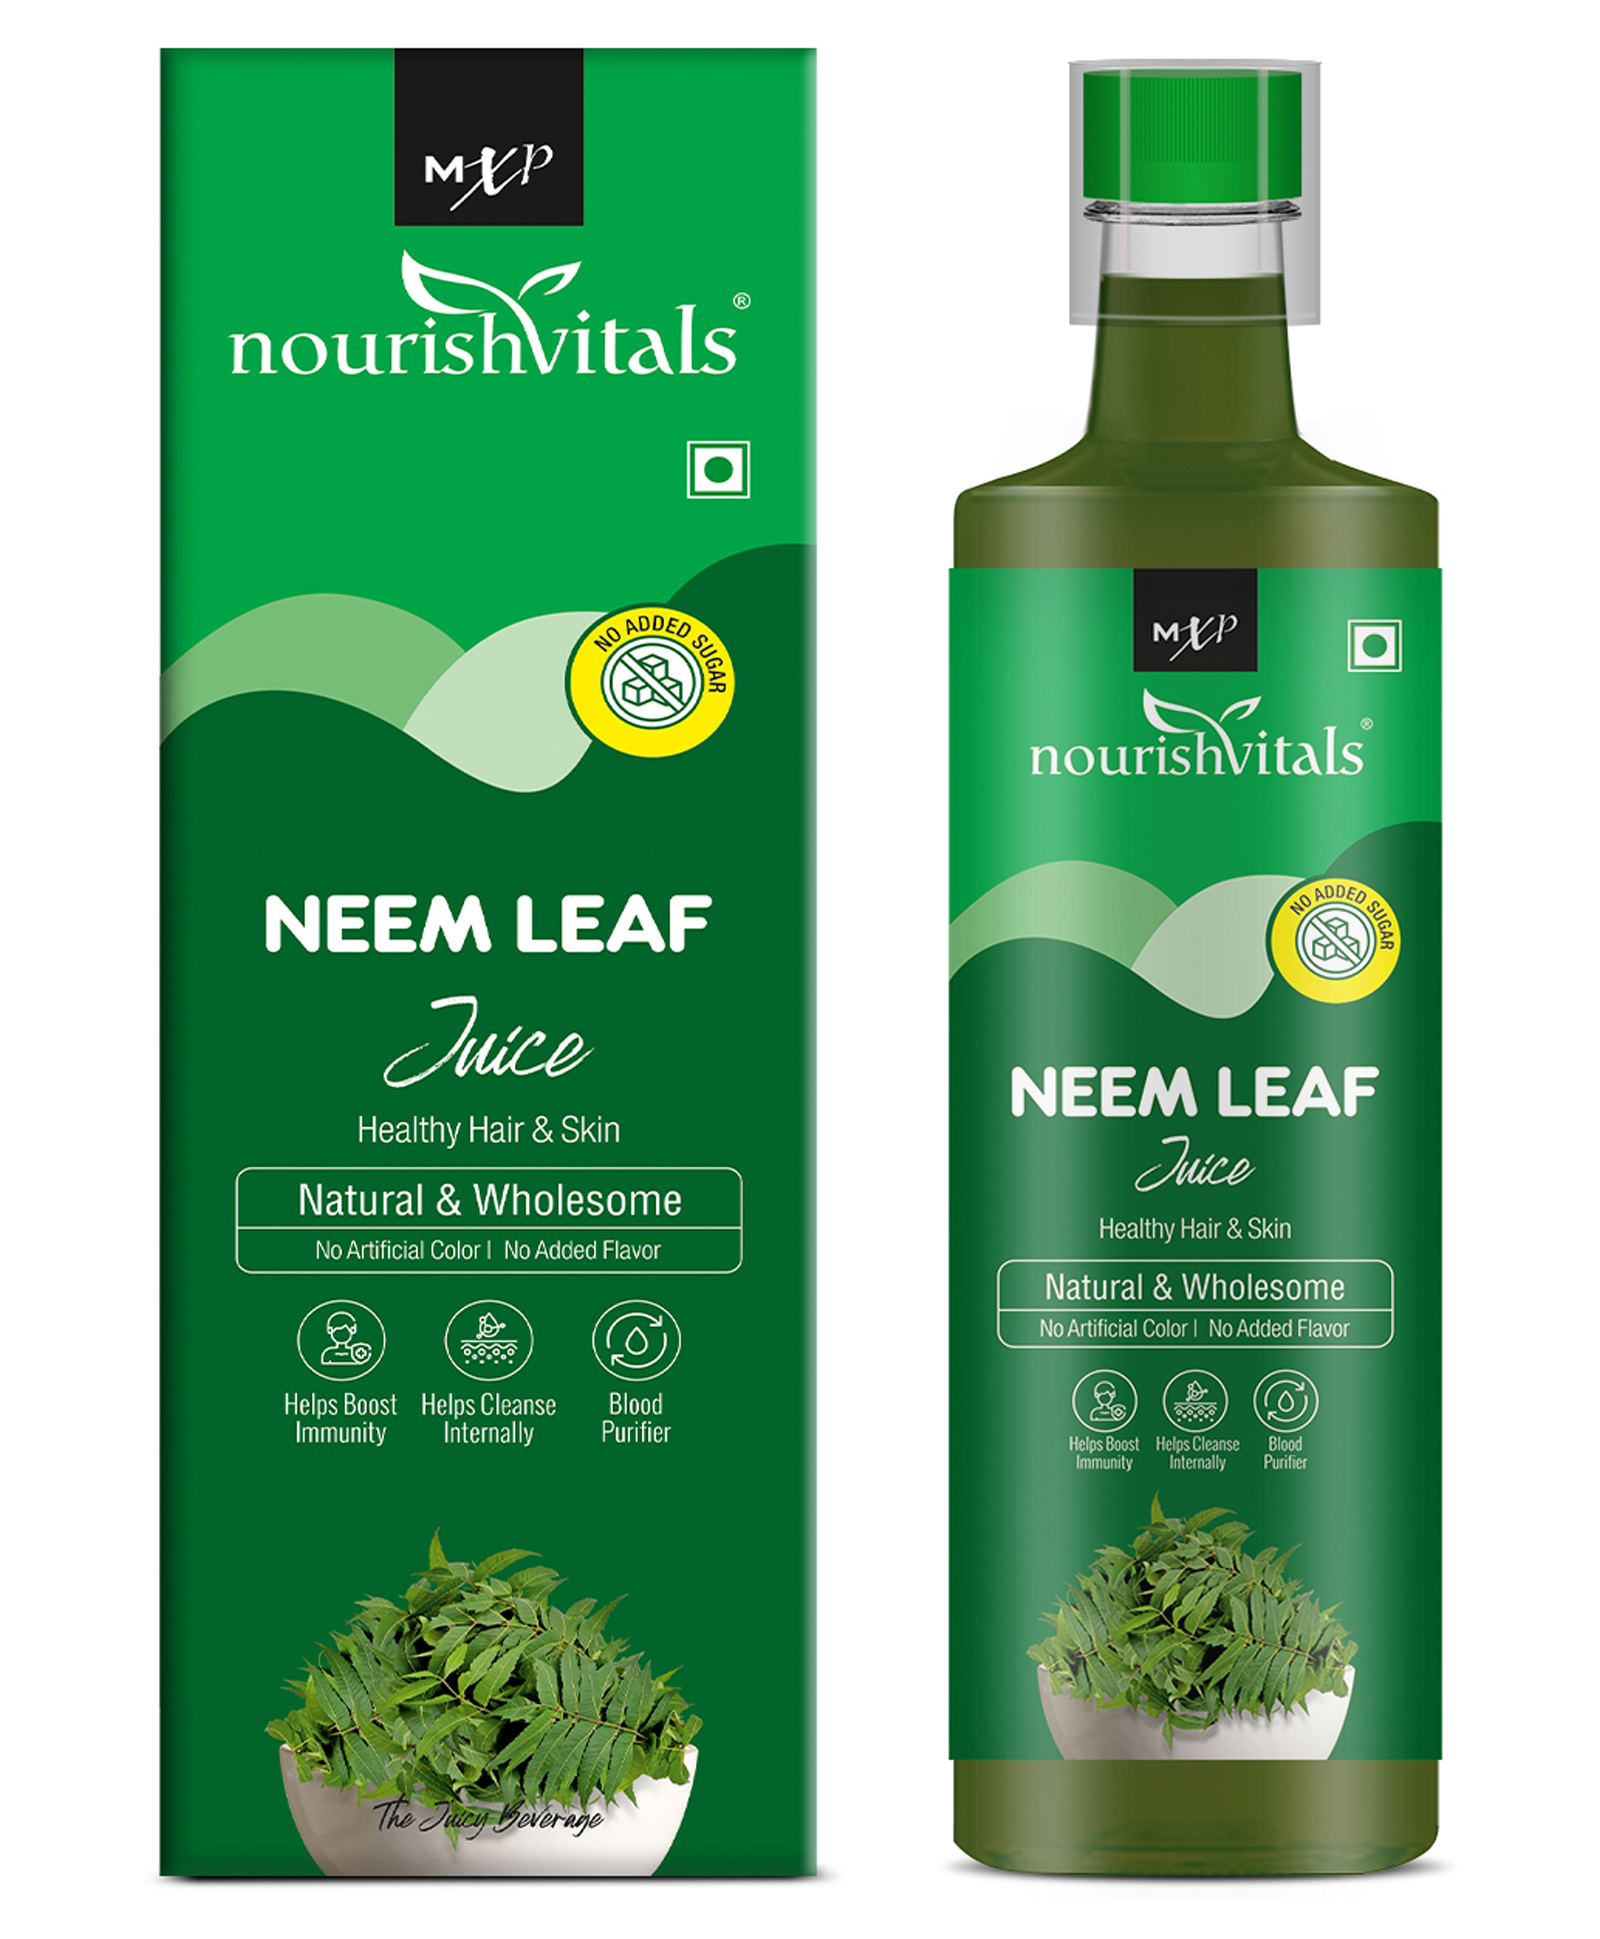 NourishVitals Neem Leaf Juice Natural & Wholesome For Healthy Hair & Skin  No Preservatives or Added Sugar - 500 ml Online in India, Buy at Best Price  from  - 10981867